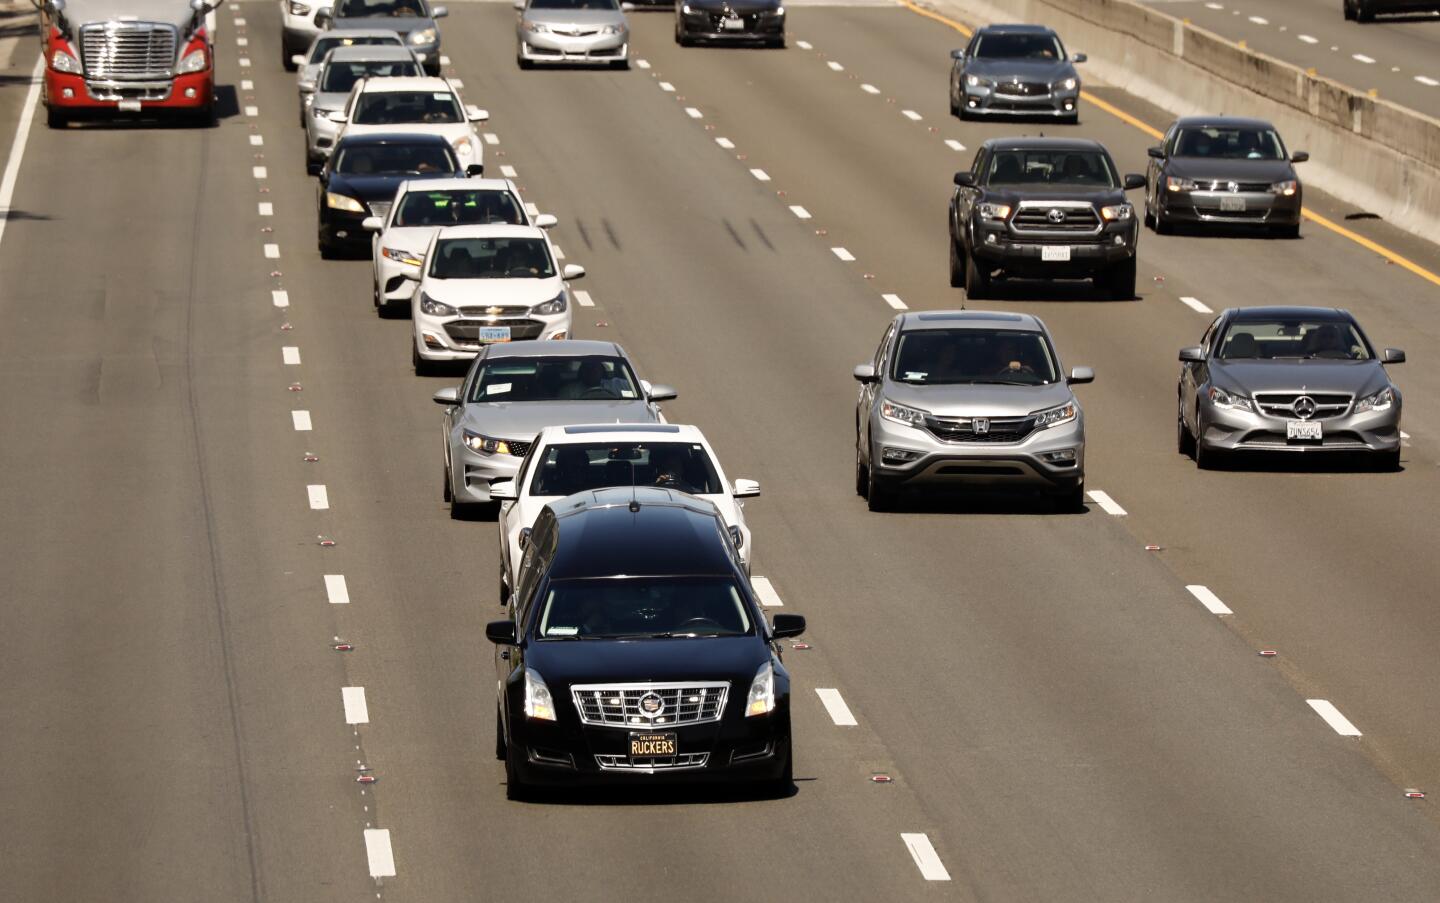 A hearse leads a procession of cars on the 101 Freeway toward downtown Los Angeles.